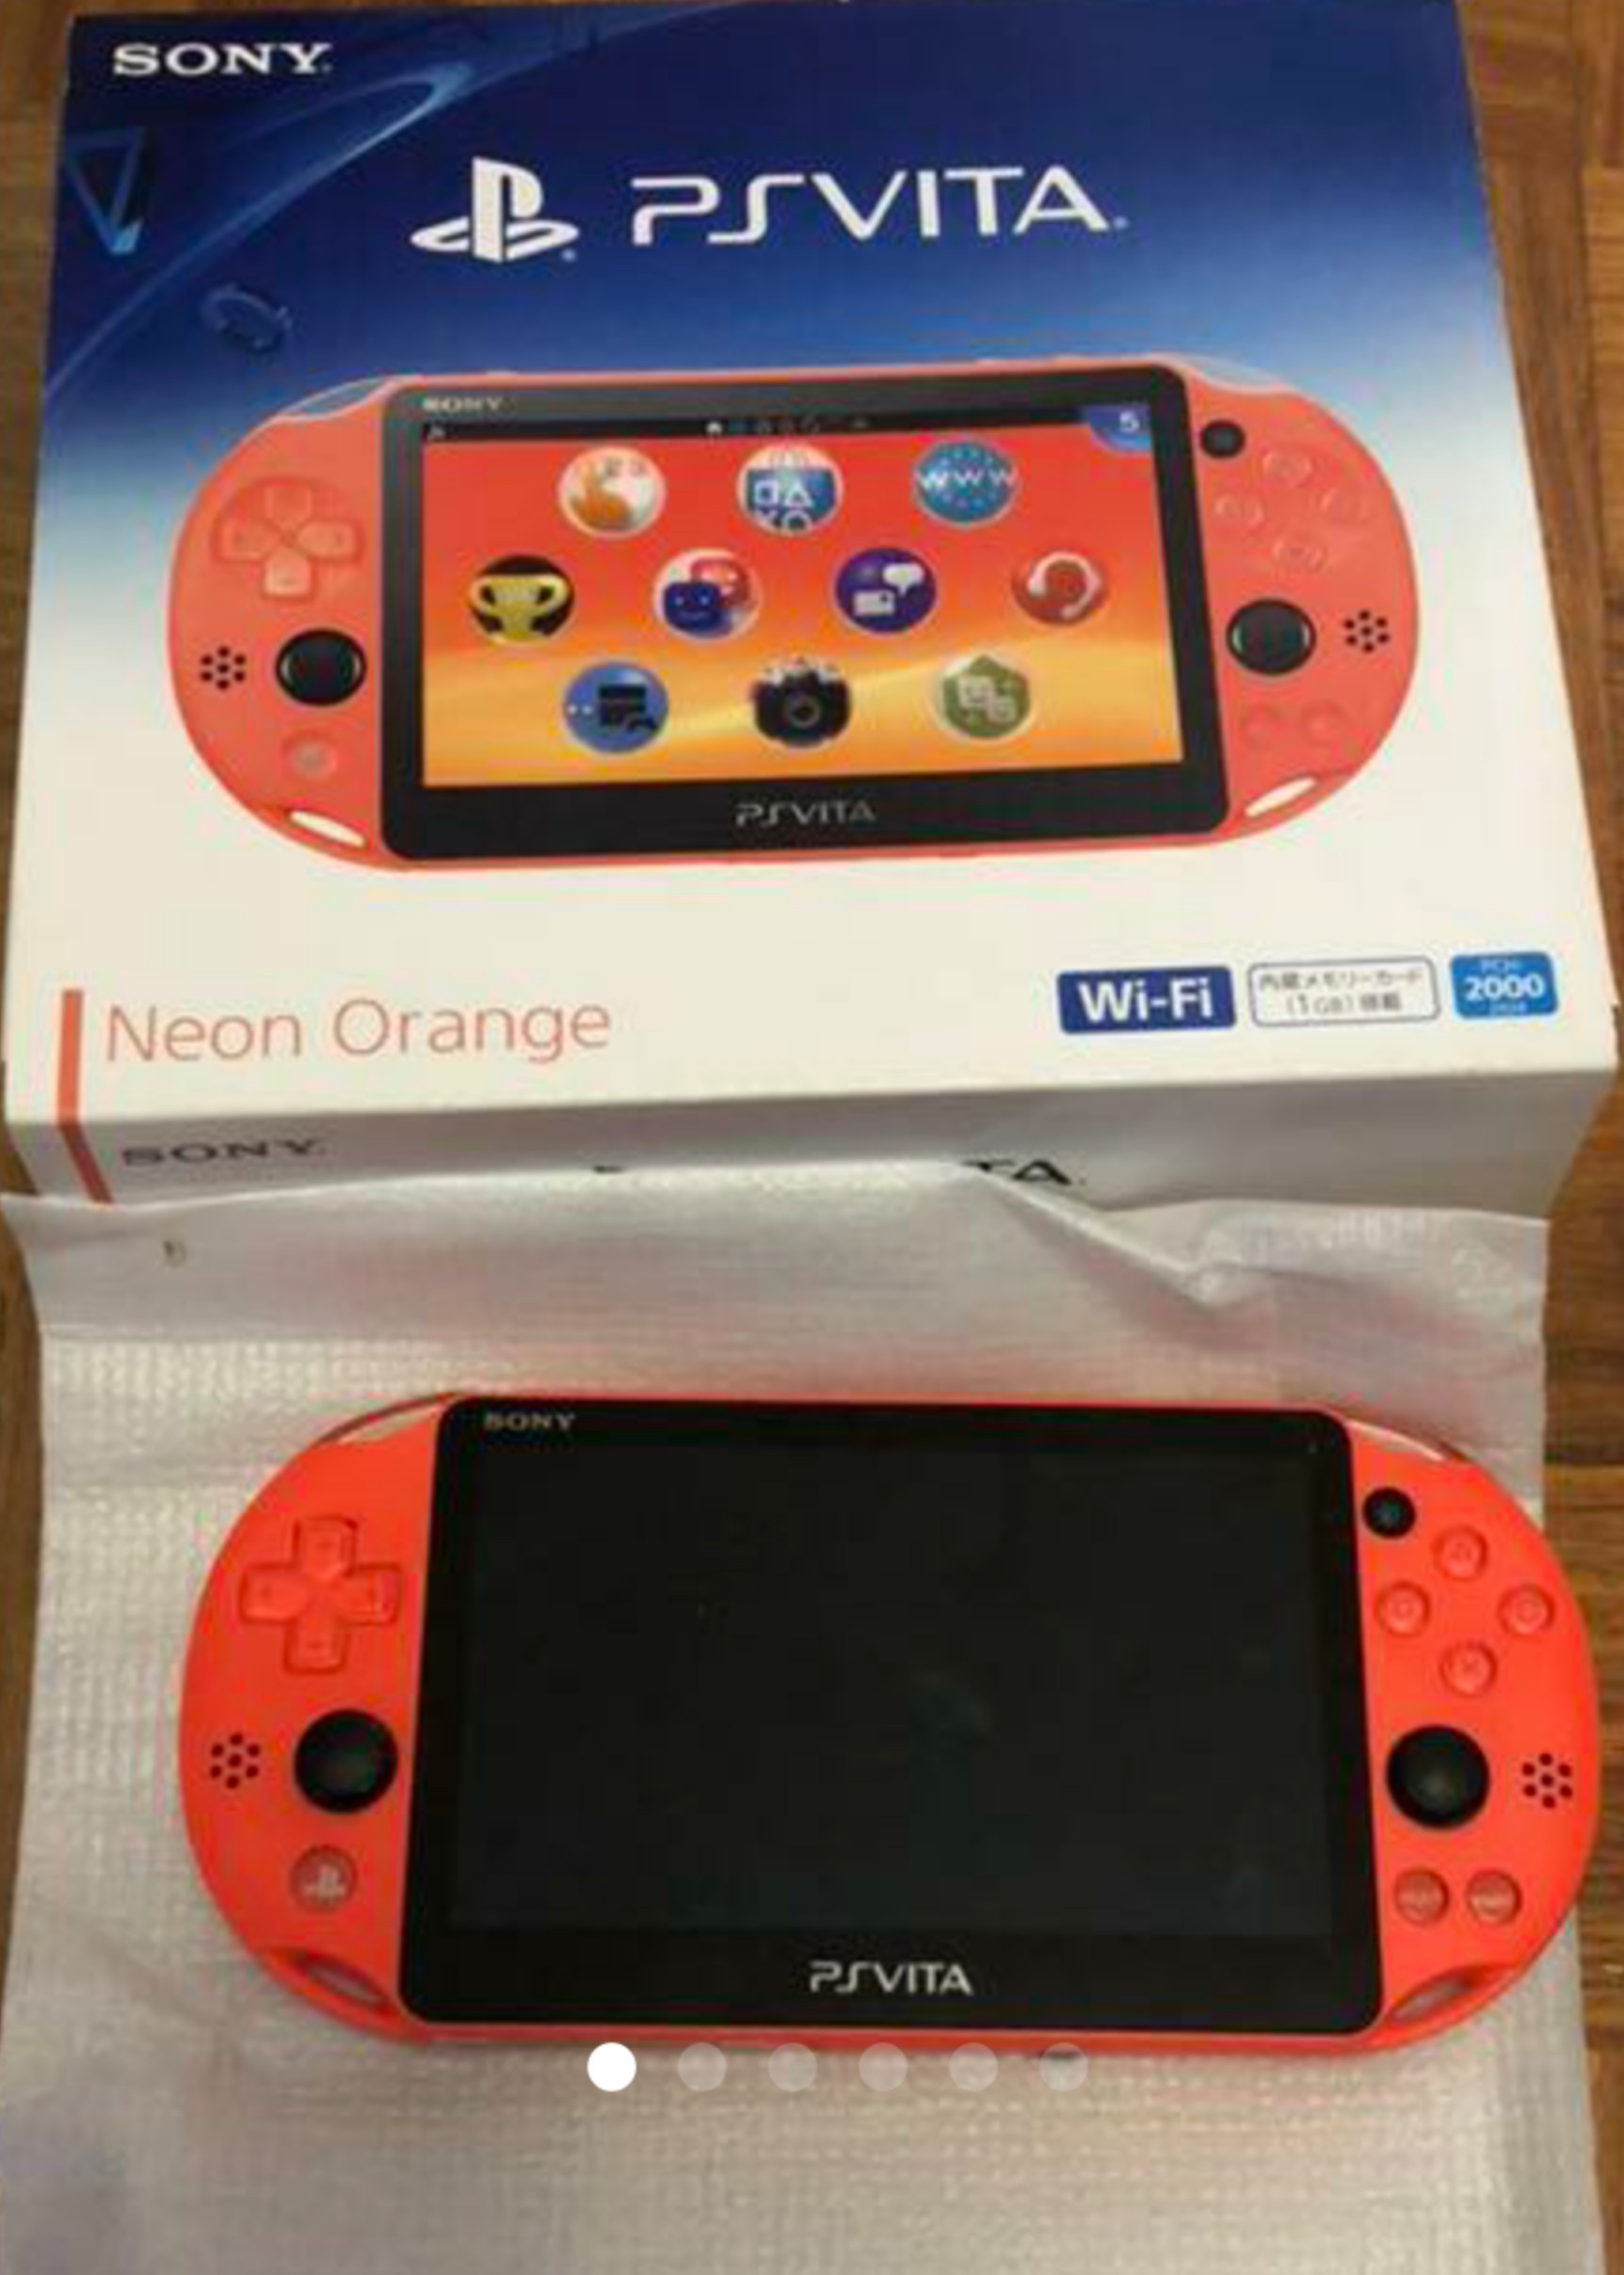 This is an offer made on the Request: Ps vita neon orange